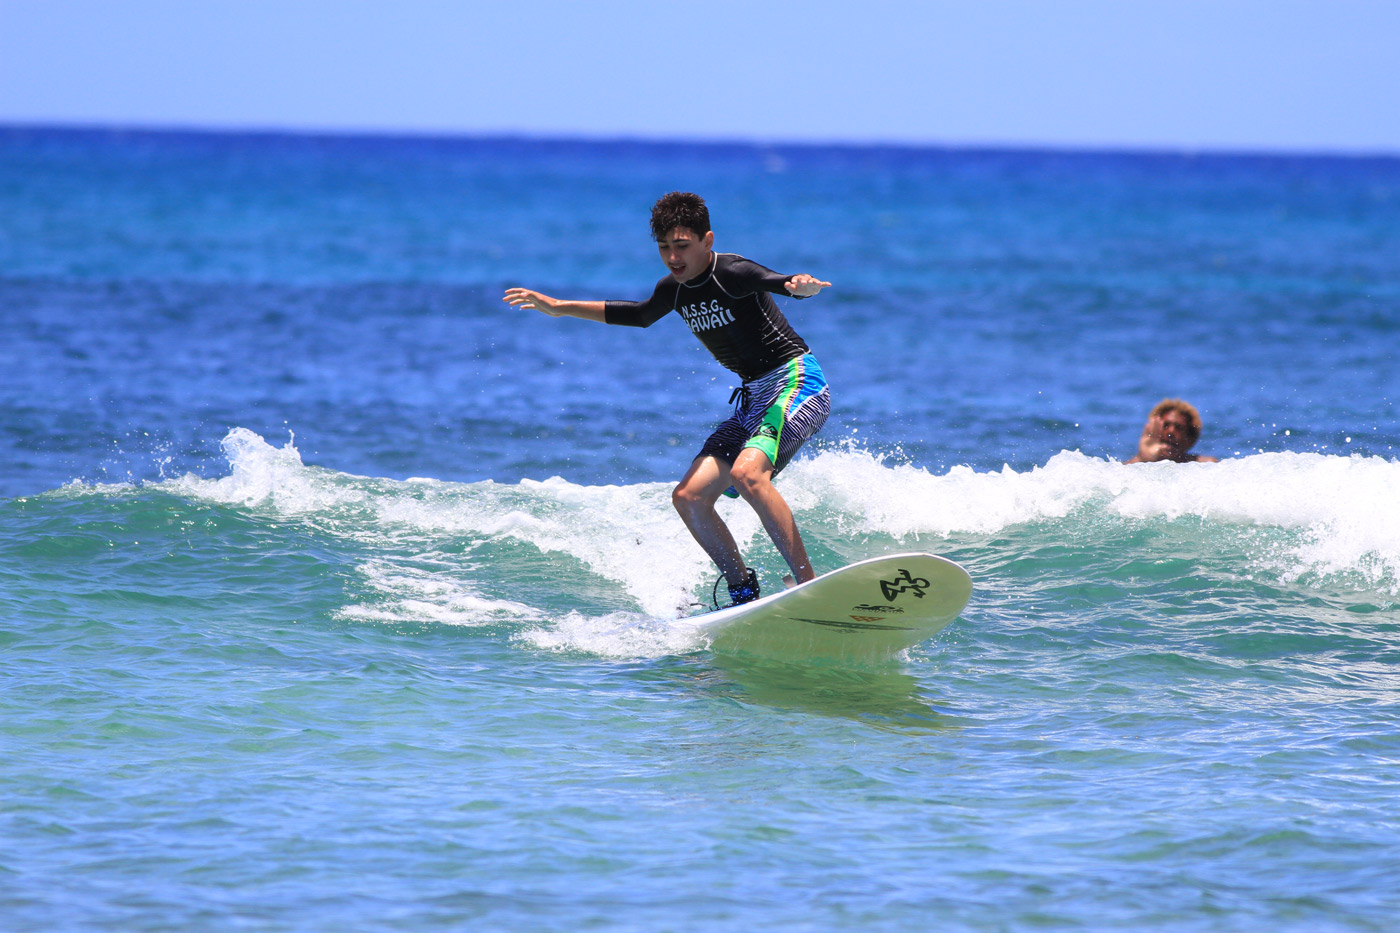 Lima Crow Ward learning to surf with Buttons Kaluhiokalani - RIP Friend